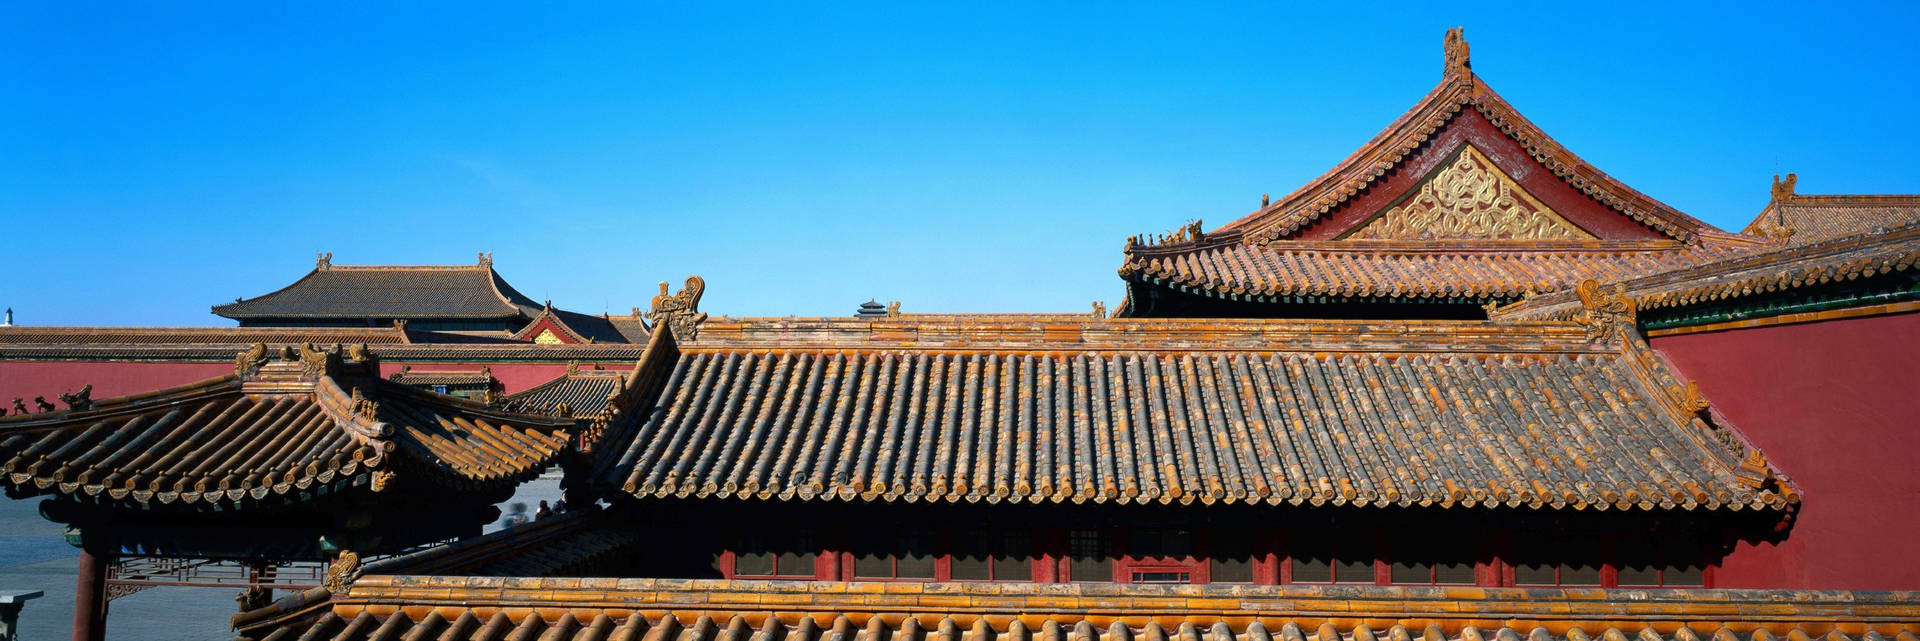 Traditional Chinese Roofs Forbidden City Wallpaper